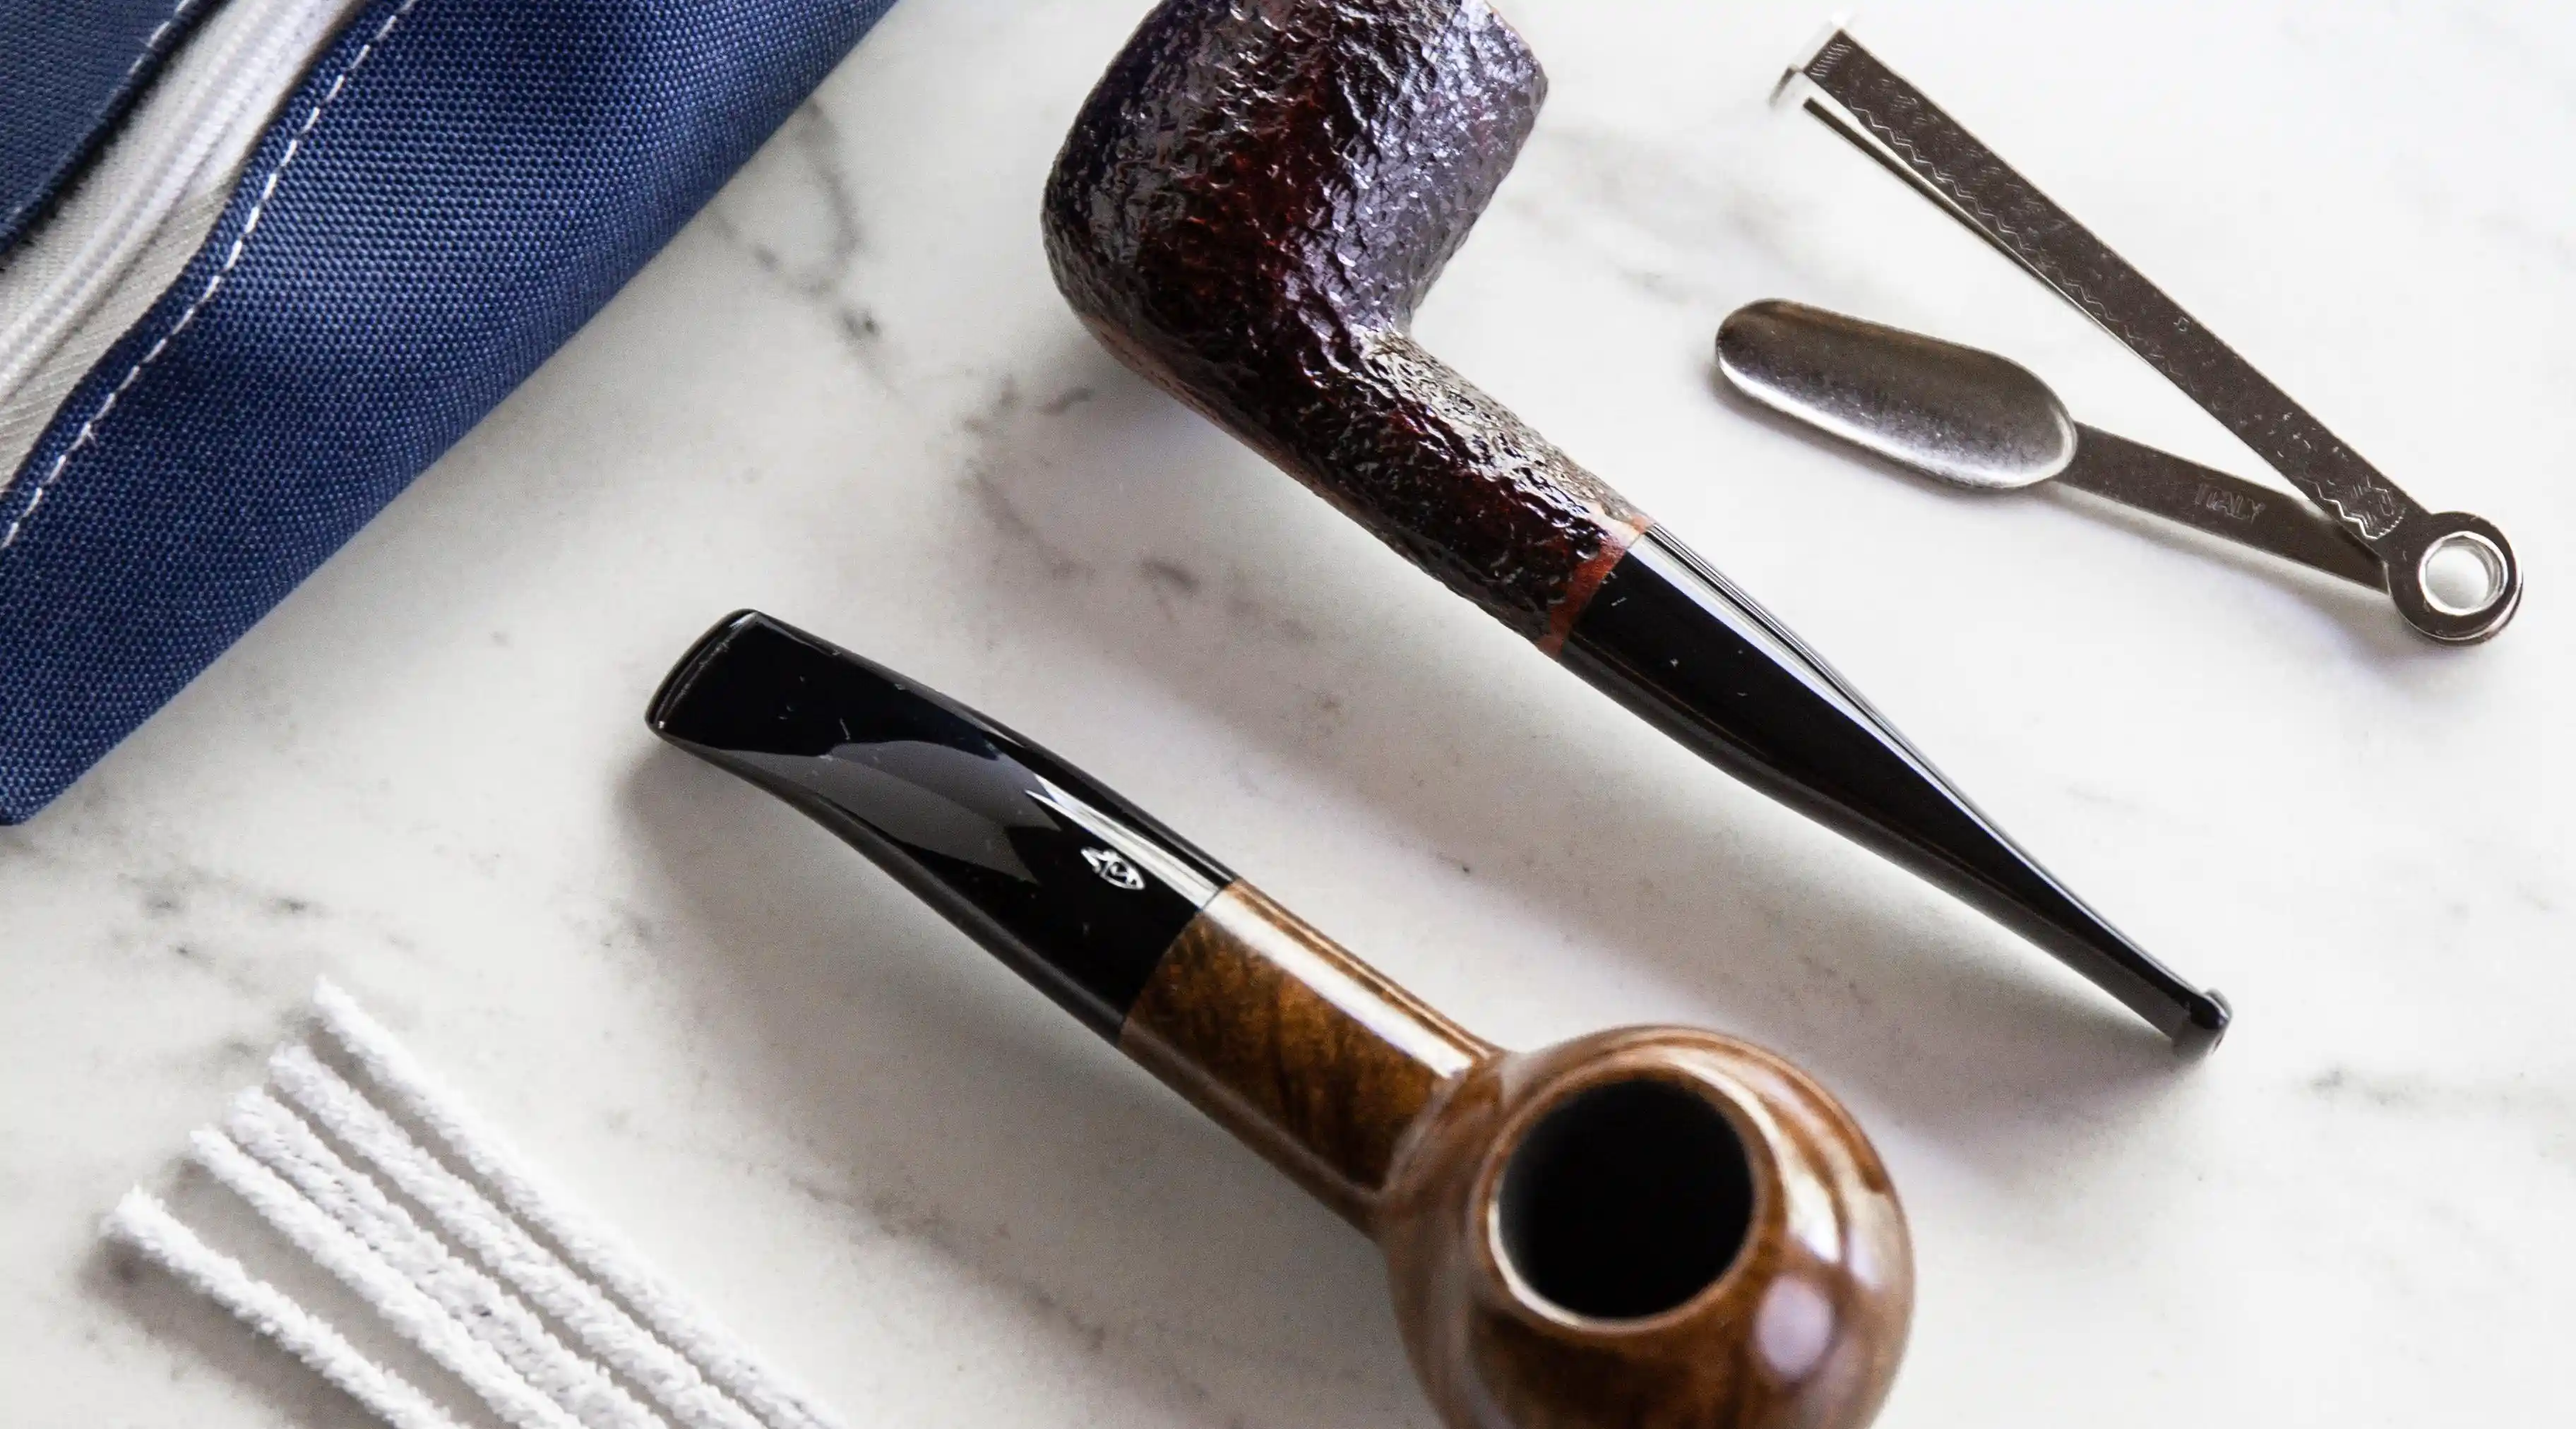 Savinelli One Starter Kit Rusticated (601) (6mm) Tobacco Pipe - The